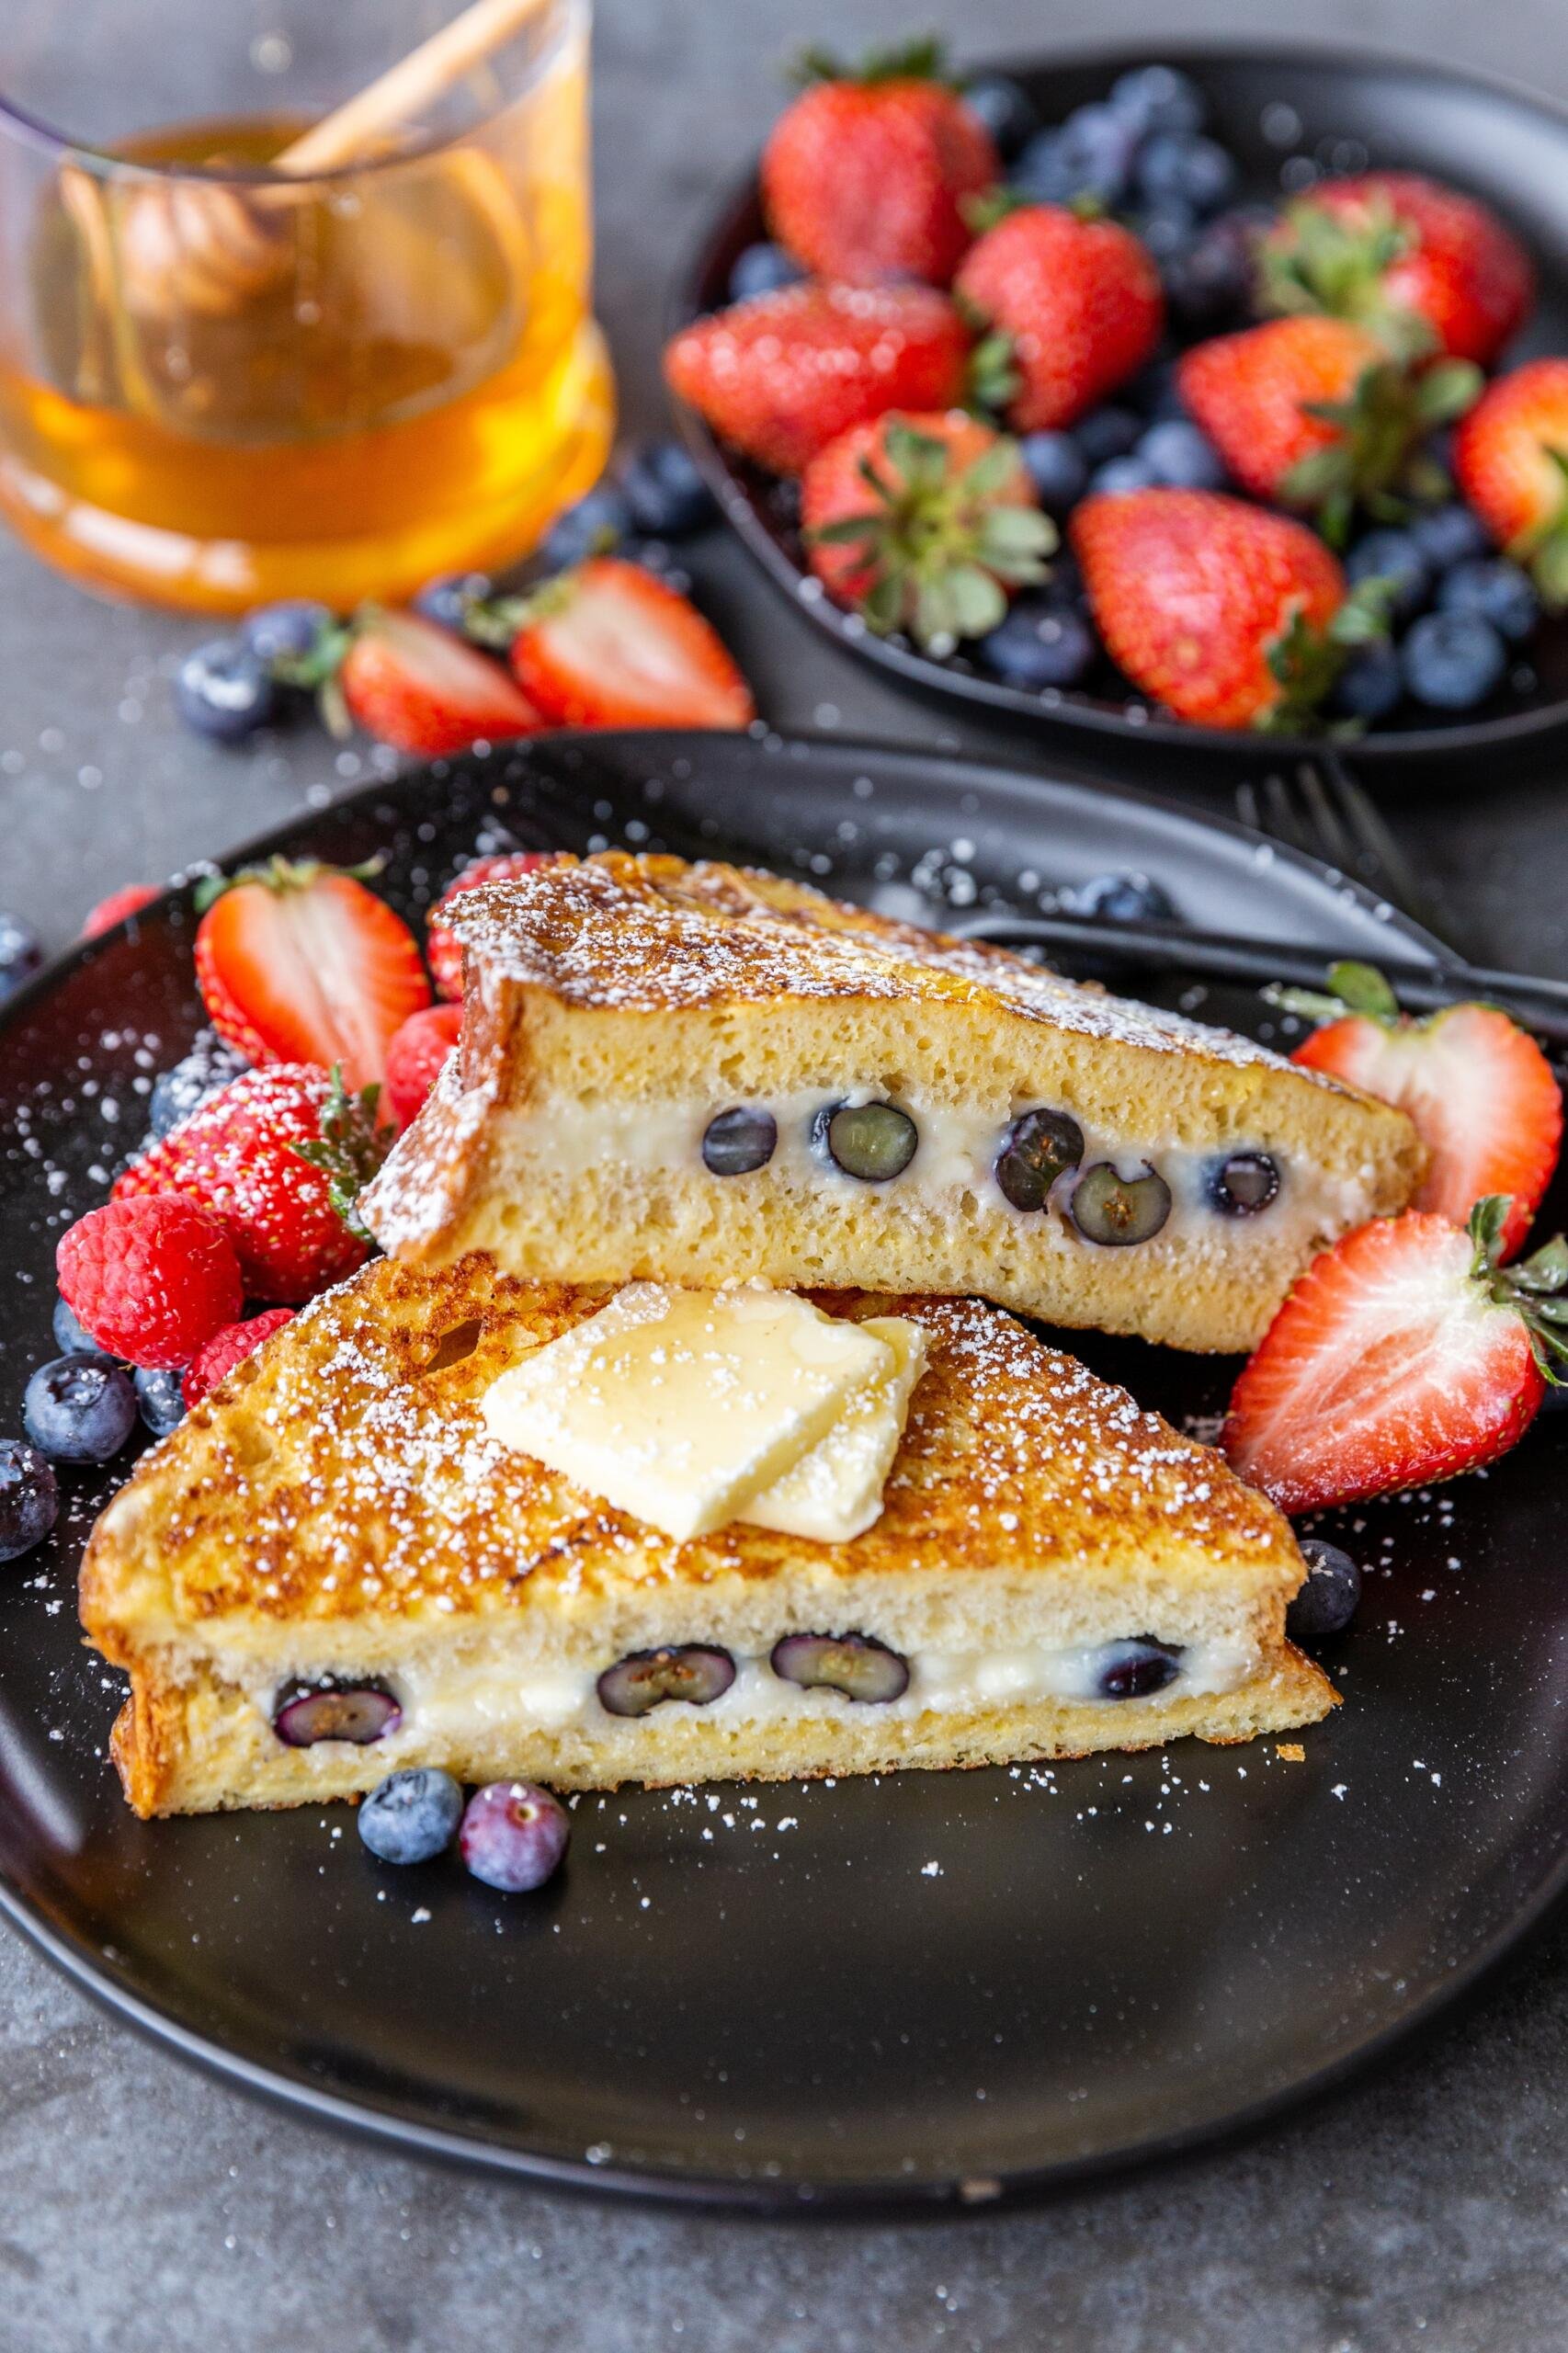 How to Make Crispy French Toast Stovetop